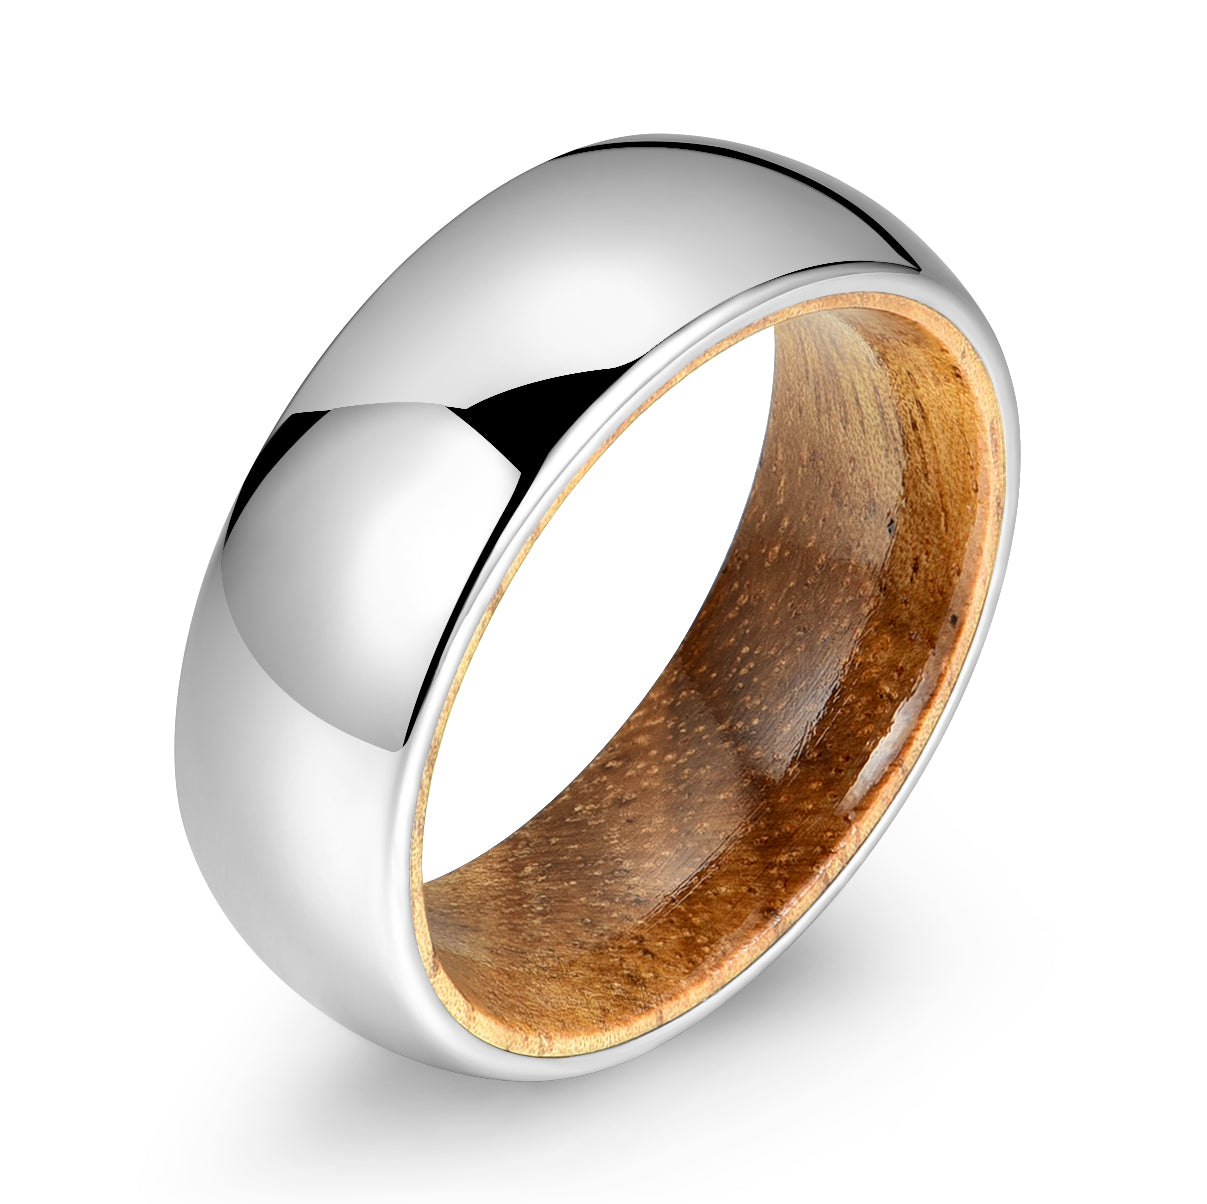 Rounded Comfort Fit Polished Silver Titanium Koa Wood Men's Wedding Band 8MM - PRISTINE RINGS